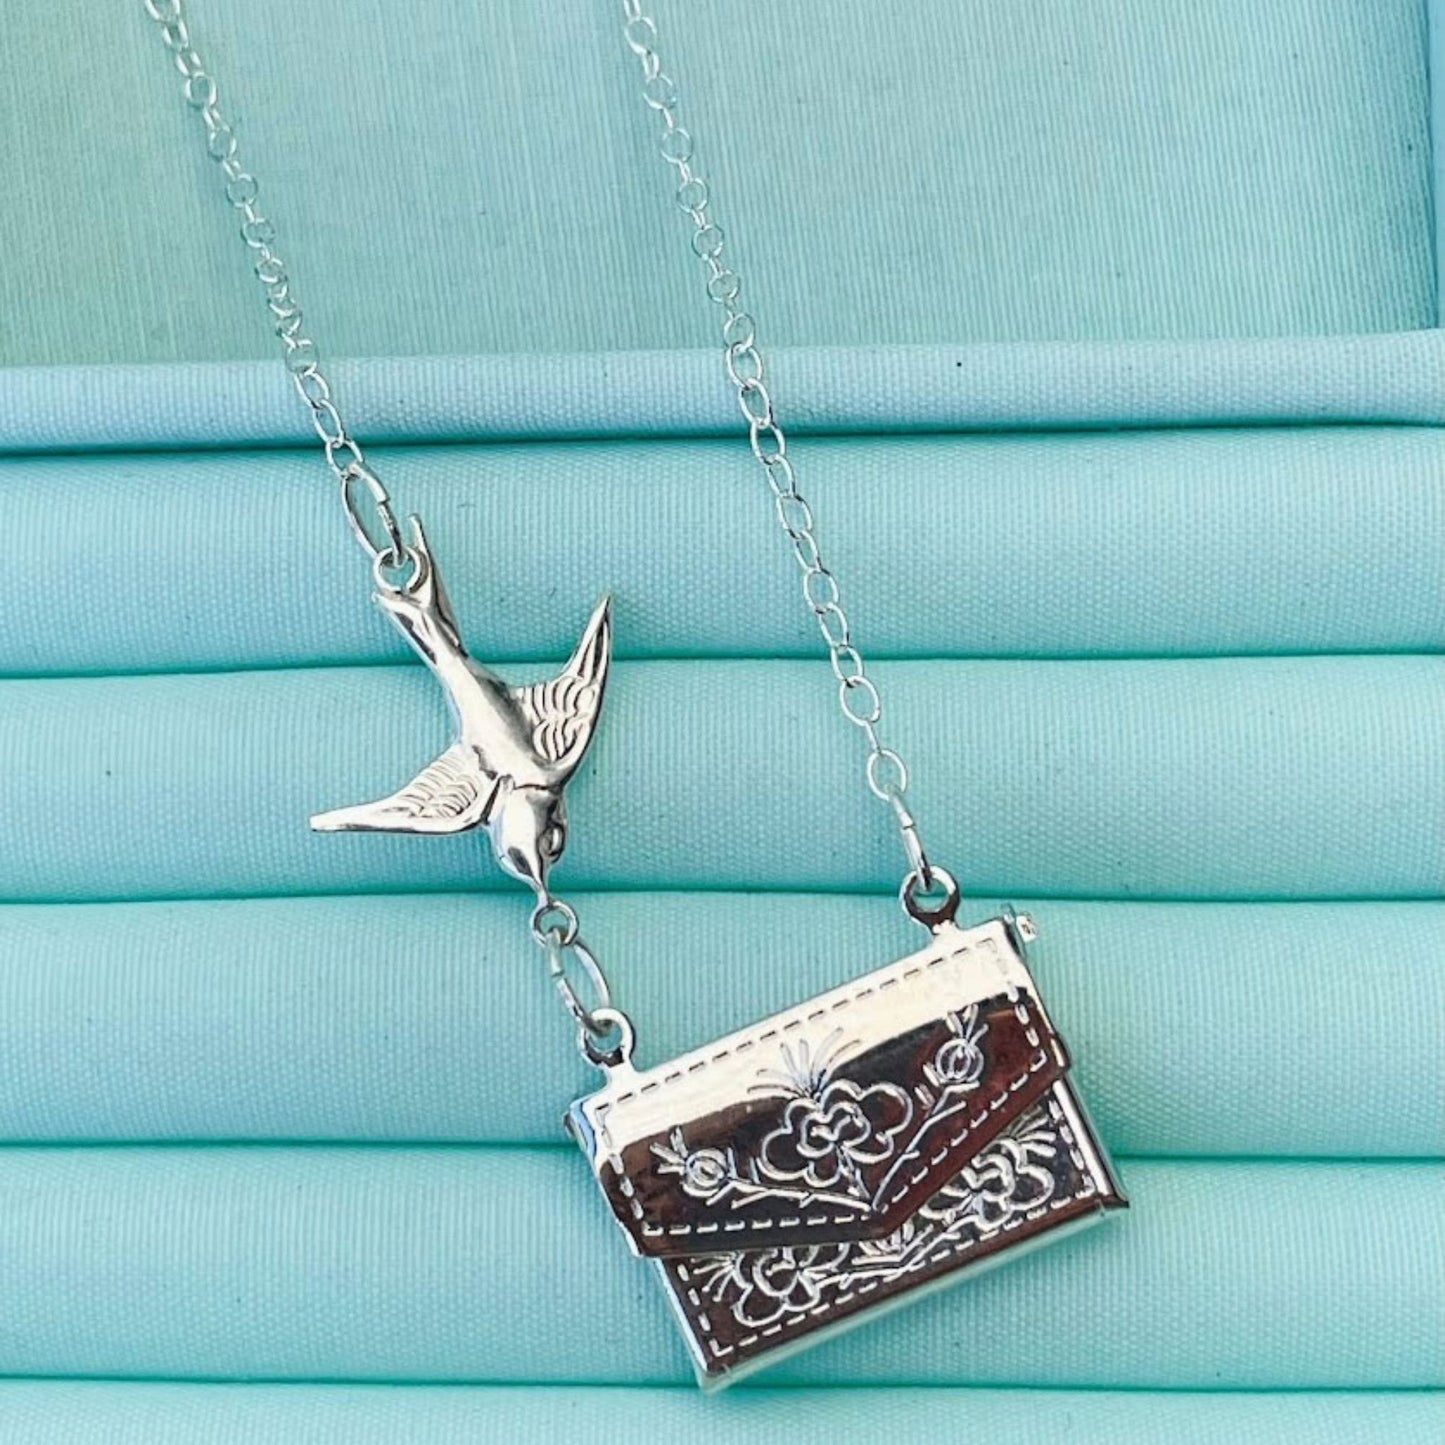 Sterling silver swallow flies towards a silver plated locket that opens to reveal the message of your choice. Secret message pendant.